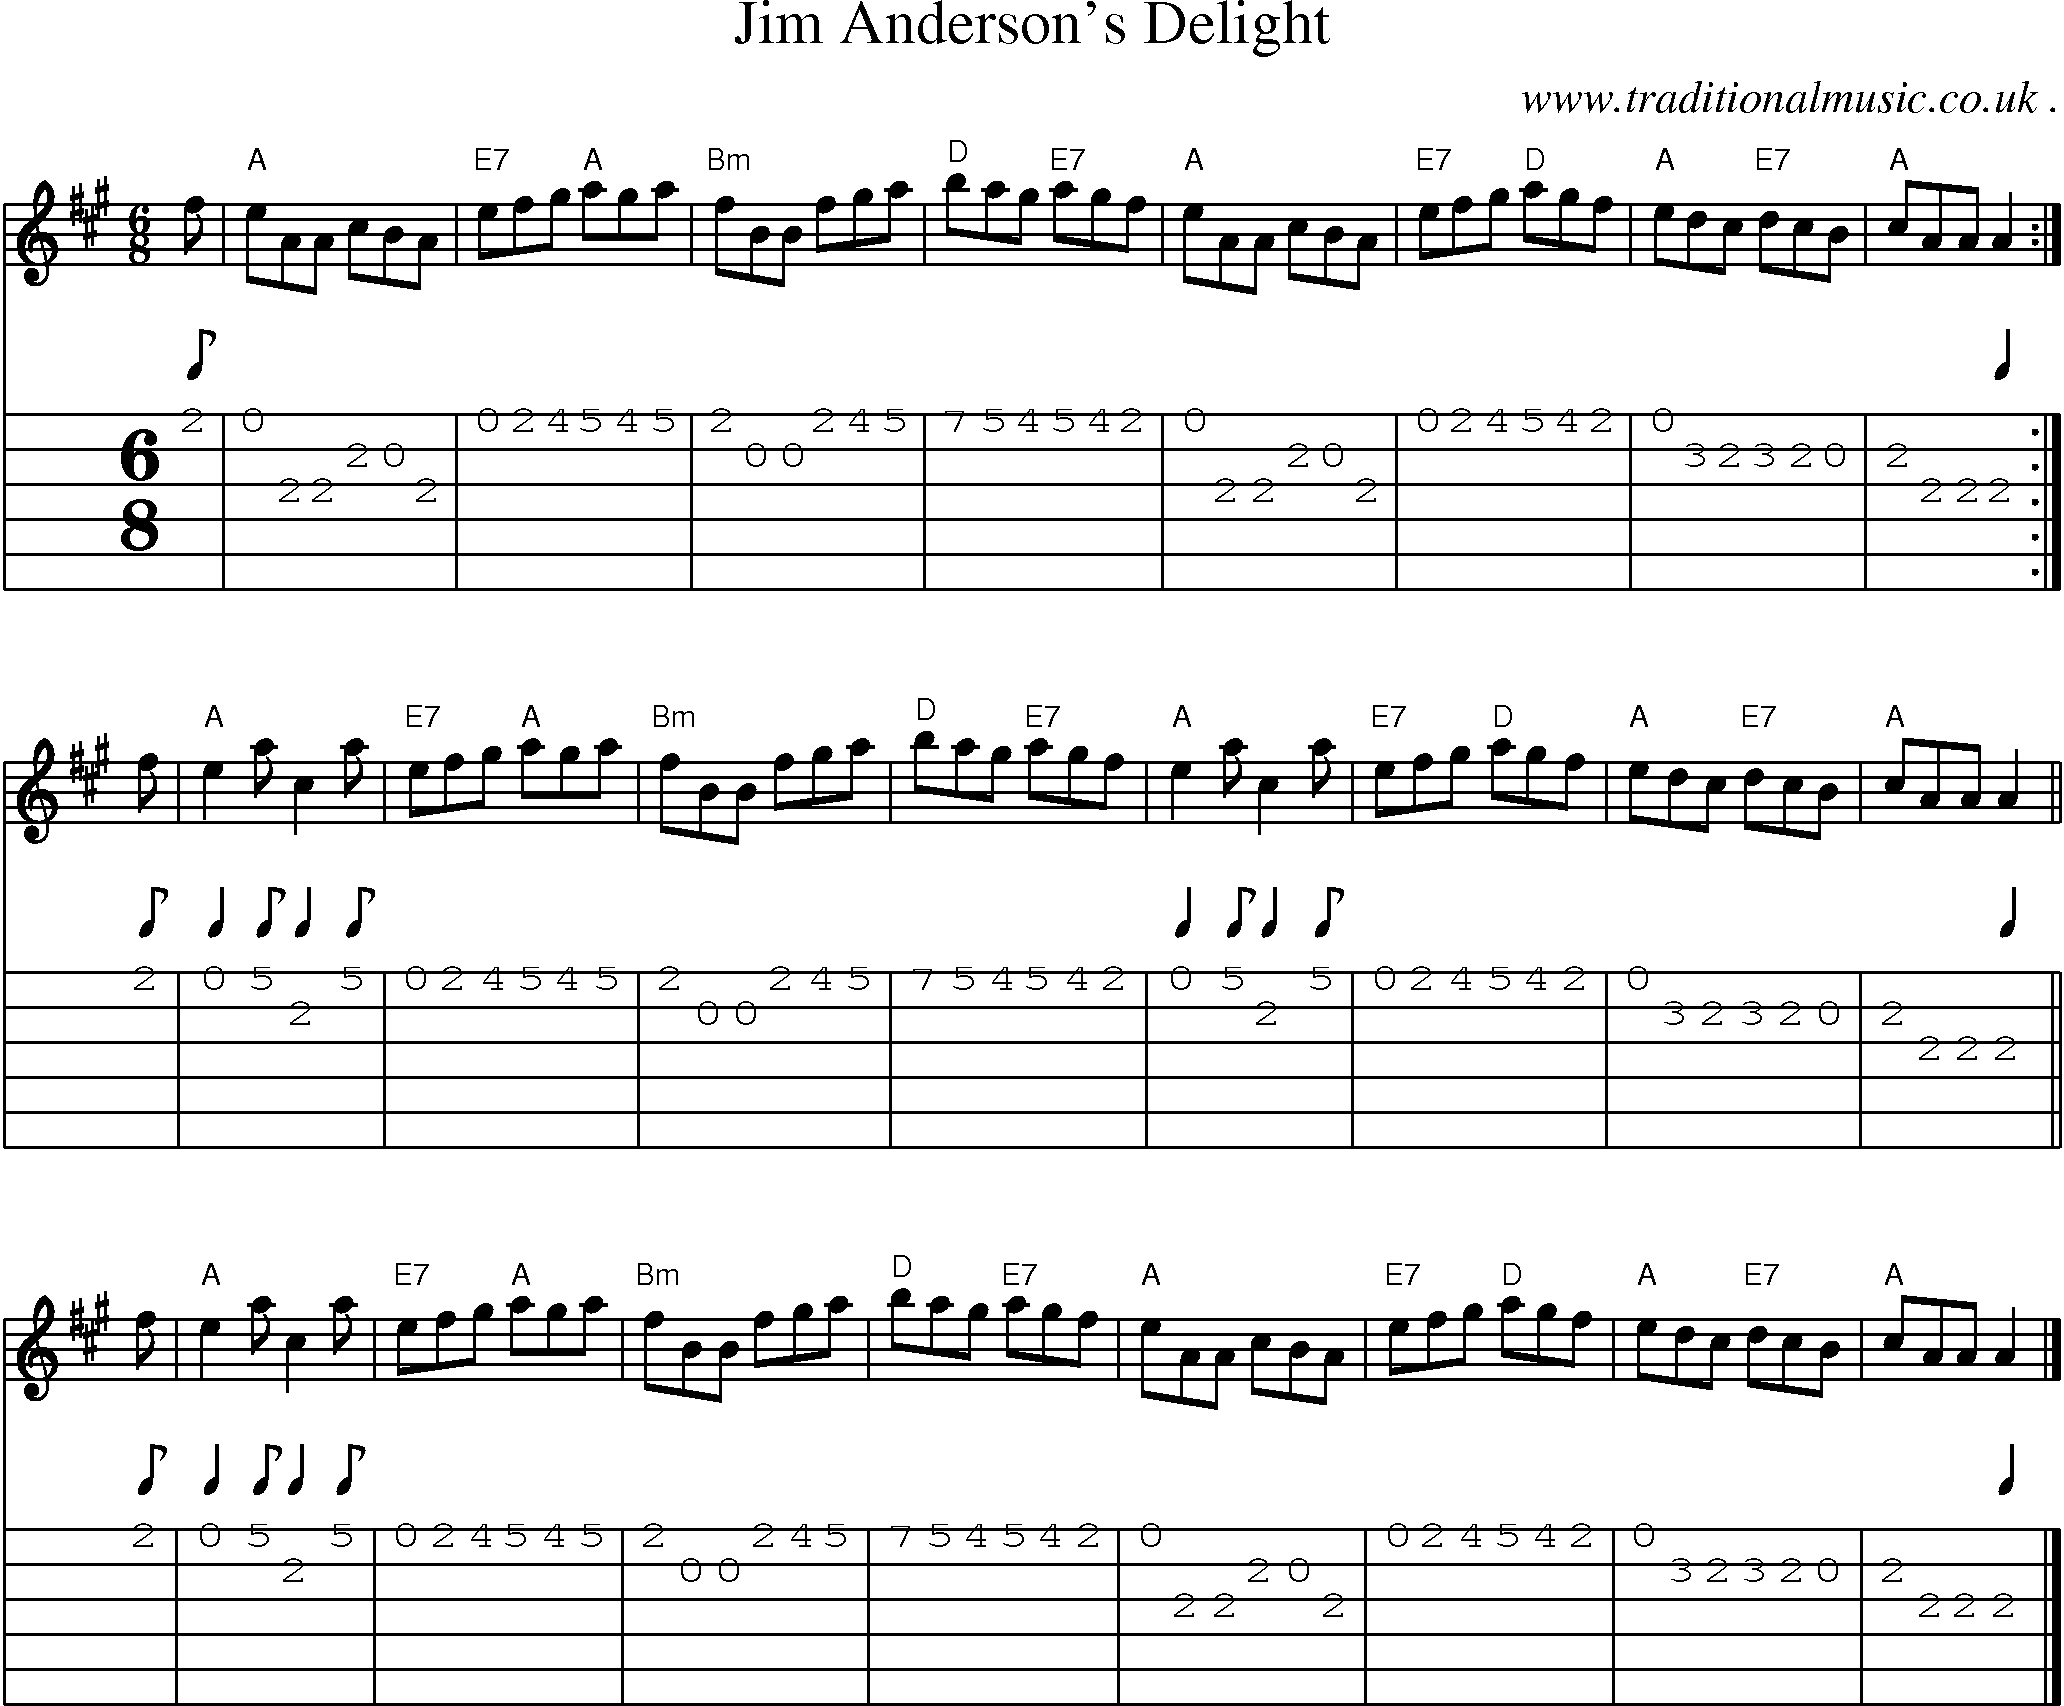 Sheet-music  score, Chords and Guitar Tabs for Jim Andersons Delight